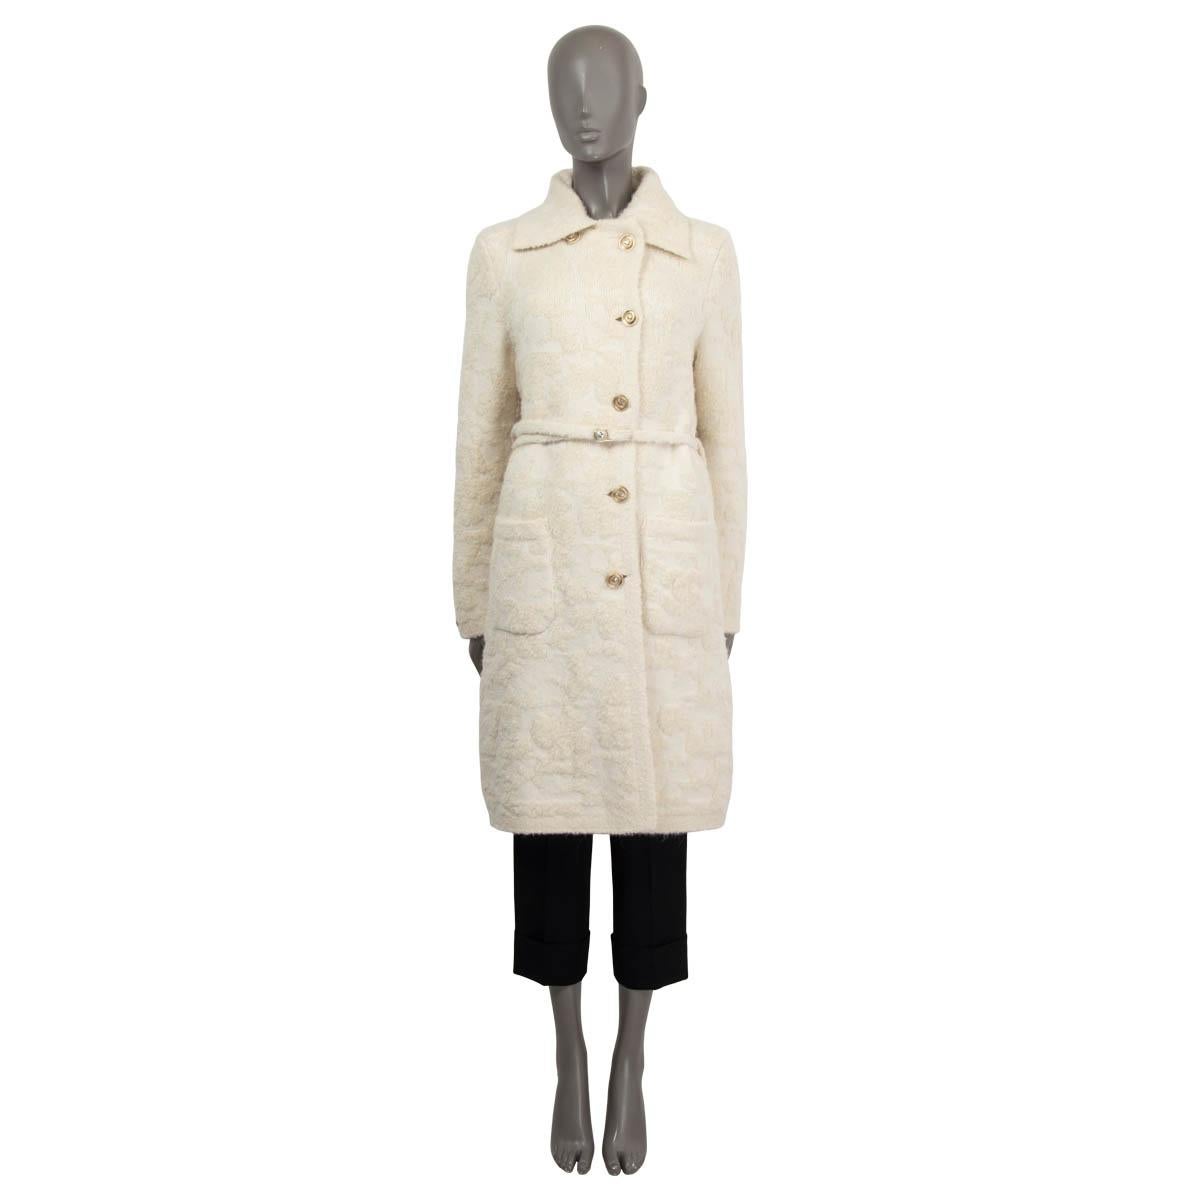 100% authentic Chanel 2020 single-breasted knit coat in ivory cashmere (75%), alpaca (16%) and silk (9%). Features two sewn shut patch pockets on the front, a detachable pearl embellished belt and buttoned cuffs. Opens with 'CC' buttons on the